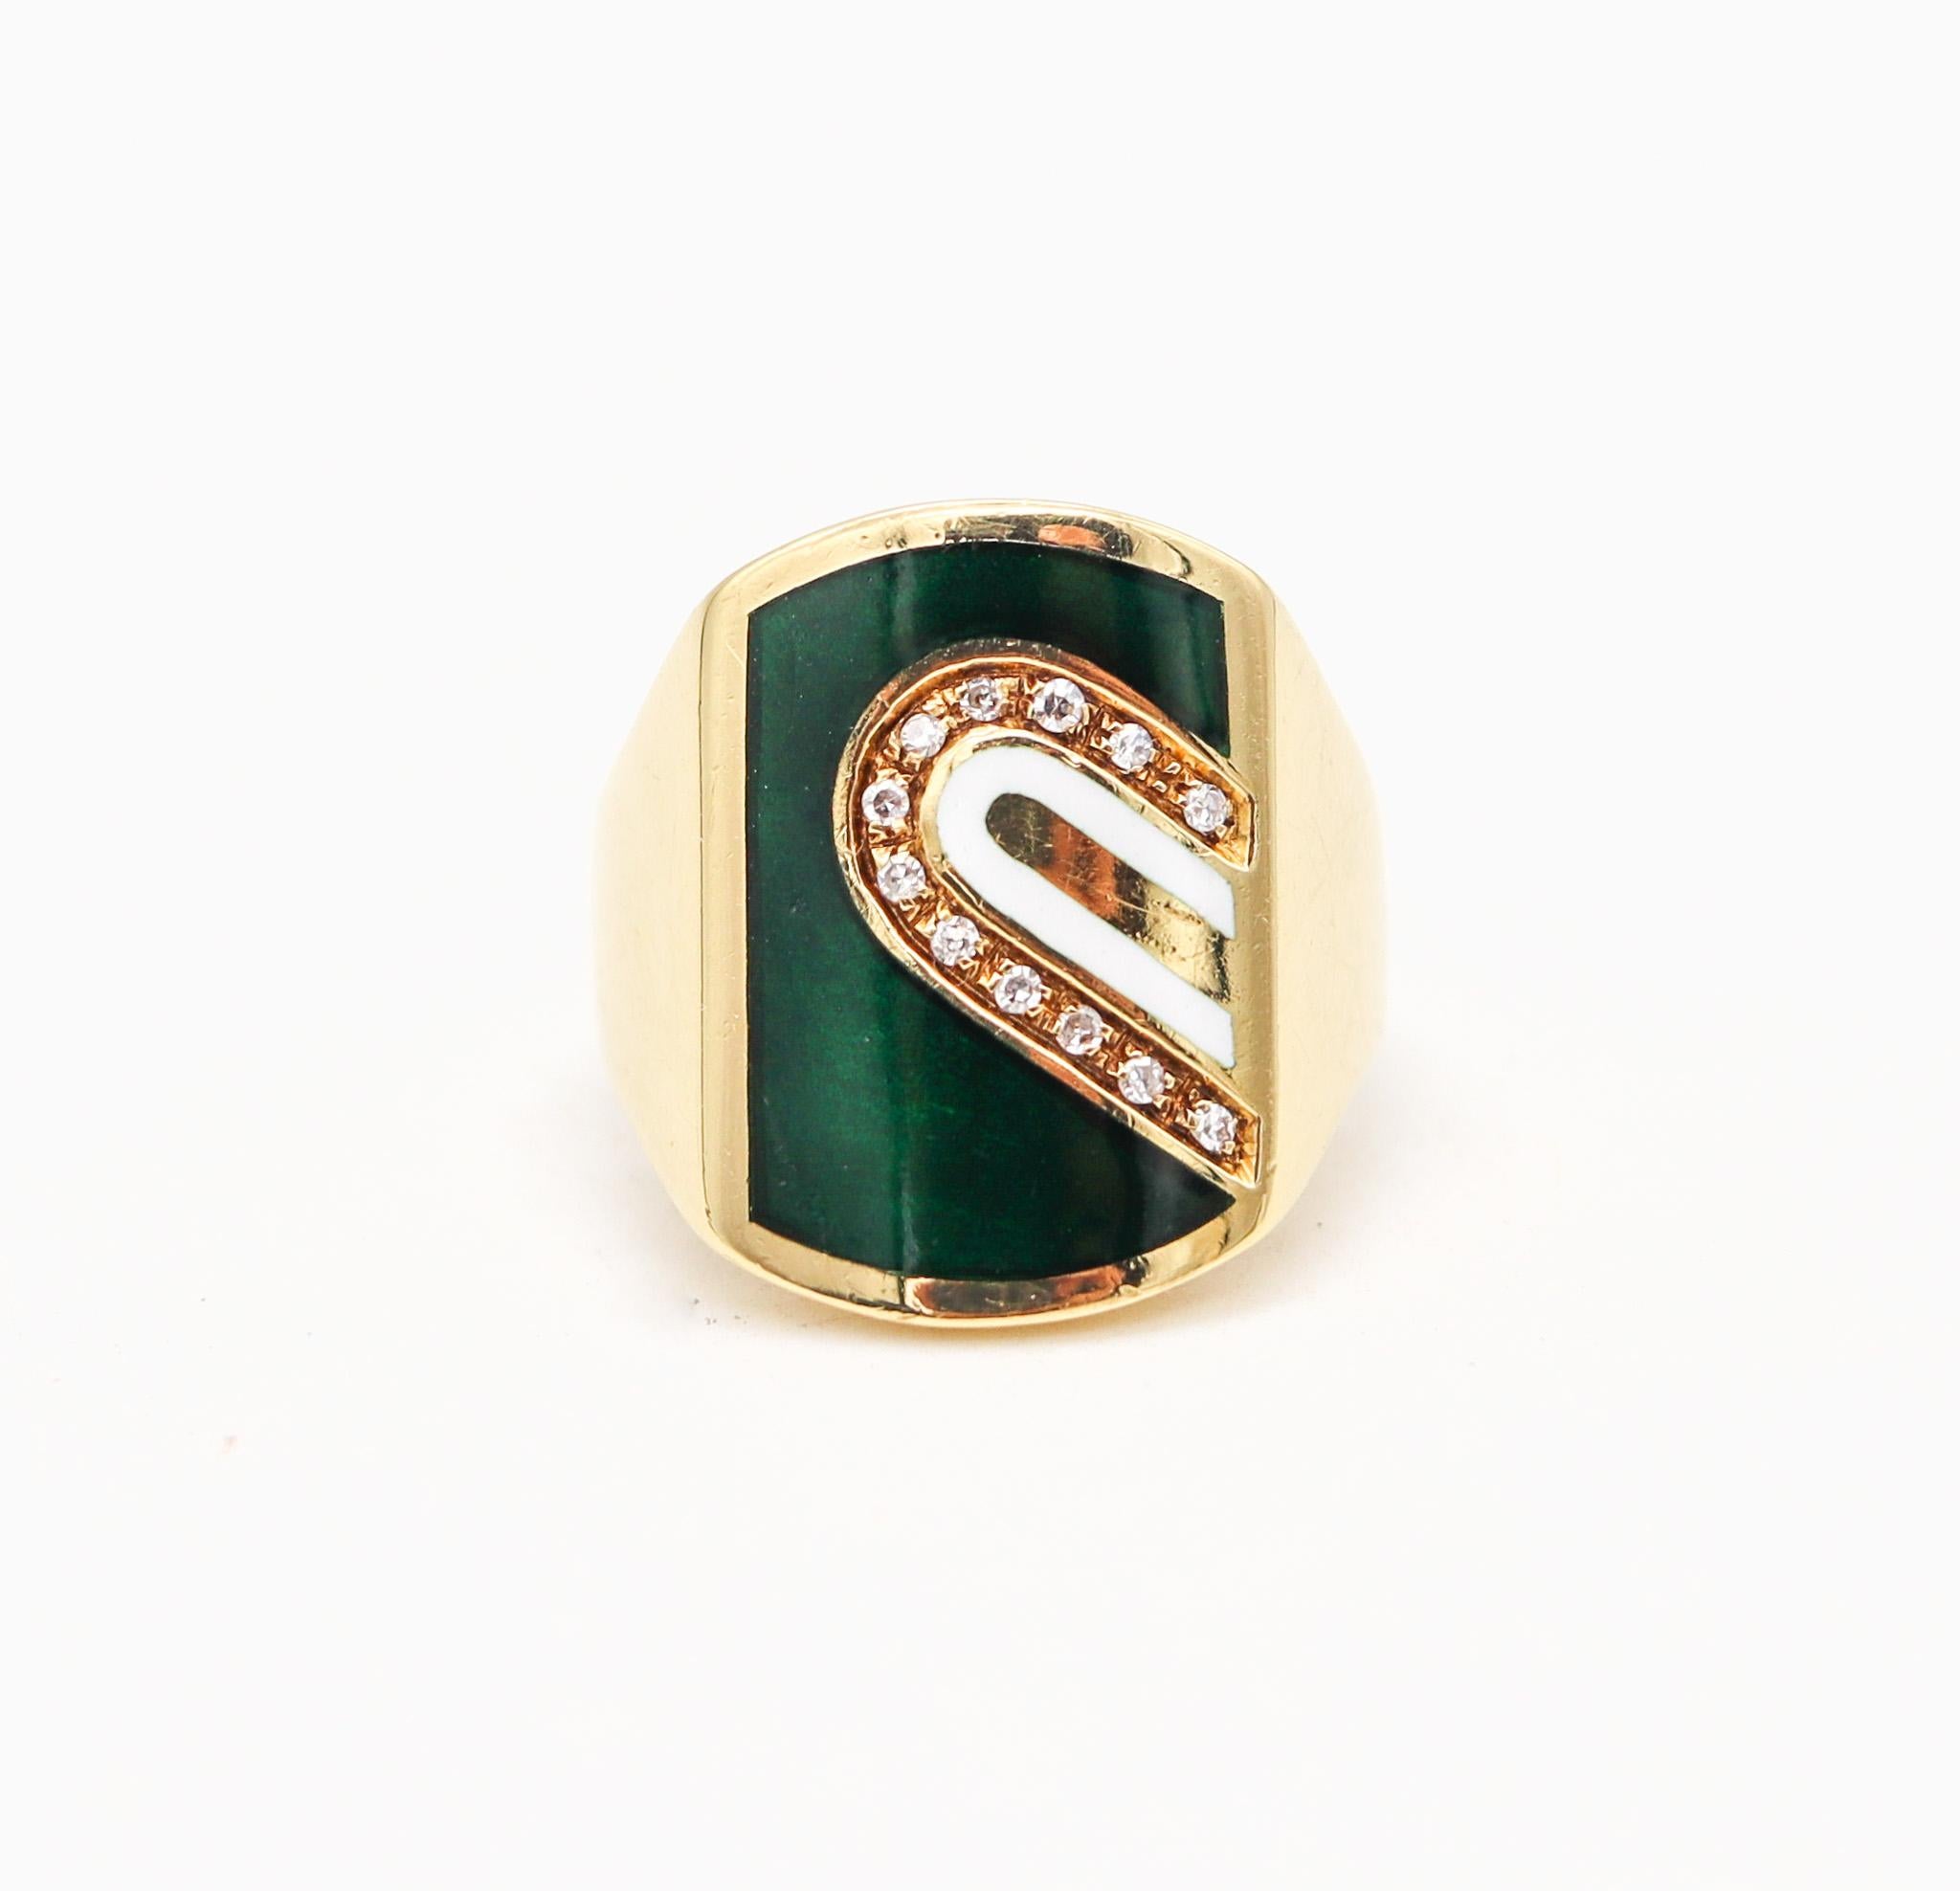 Cartier 1970 Modernist Enameled Signet Ring in 18 Karat Gold with Diamonds For Sale 2